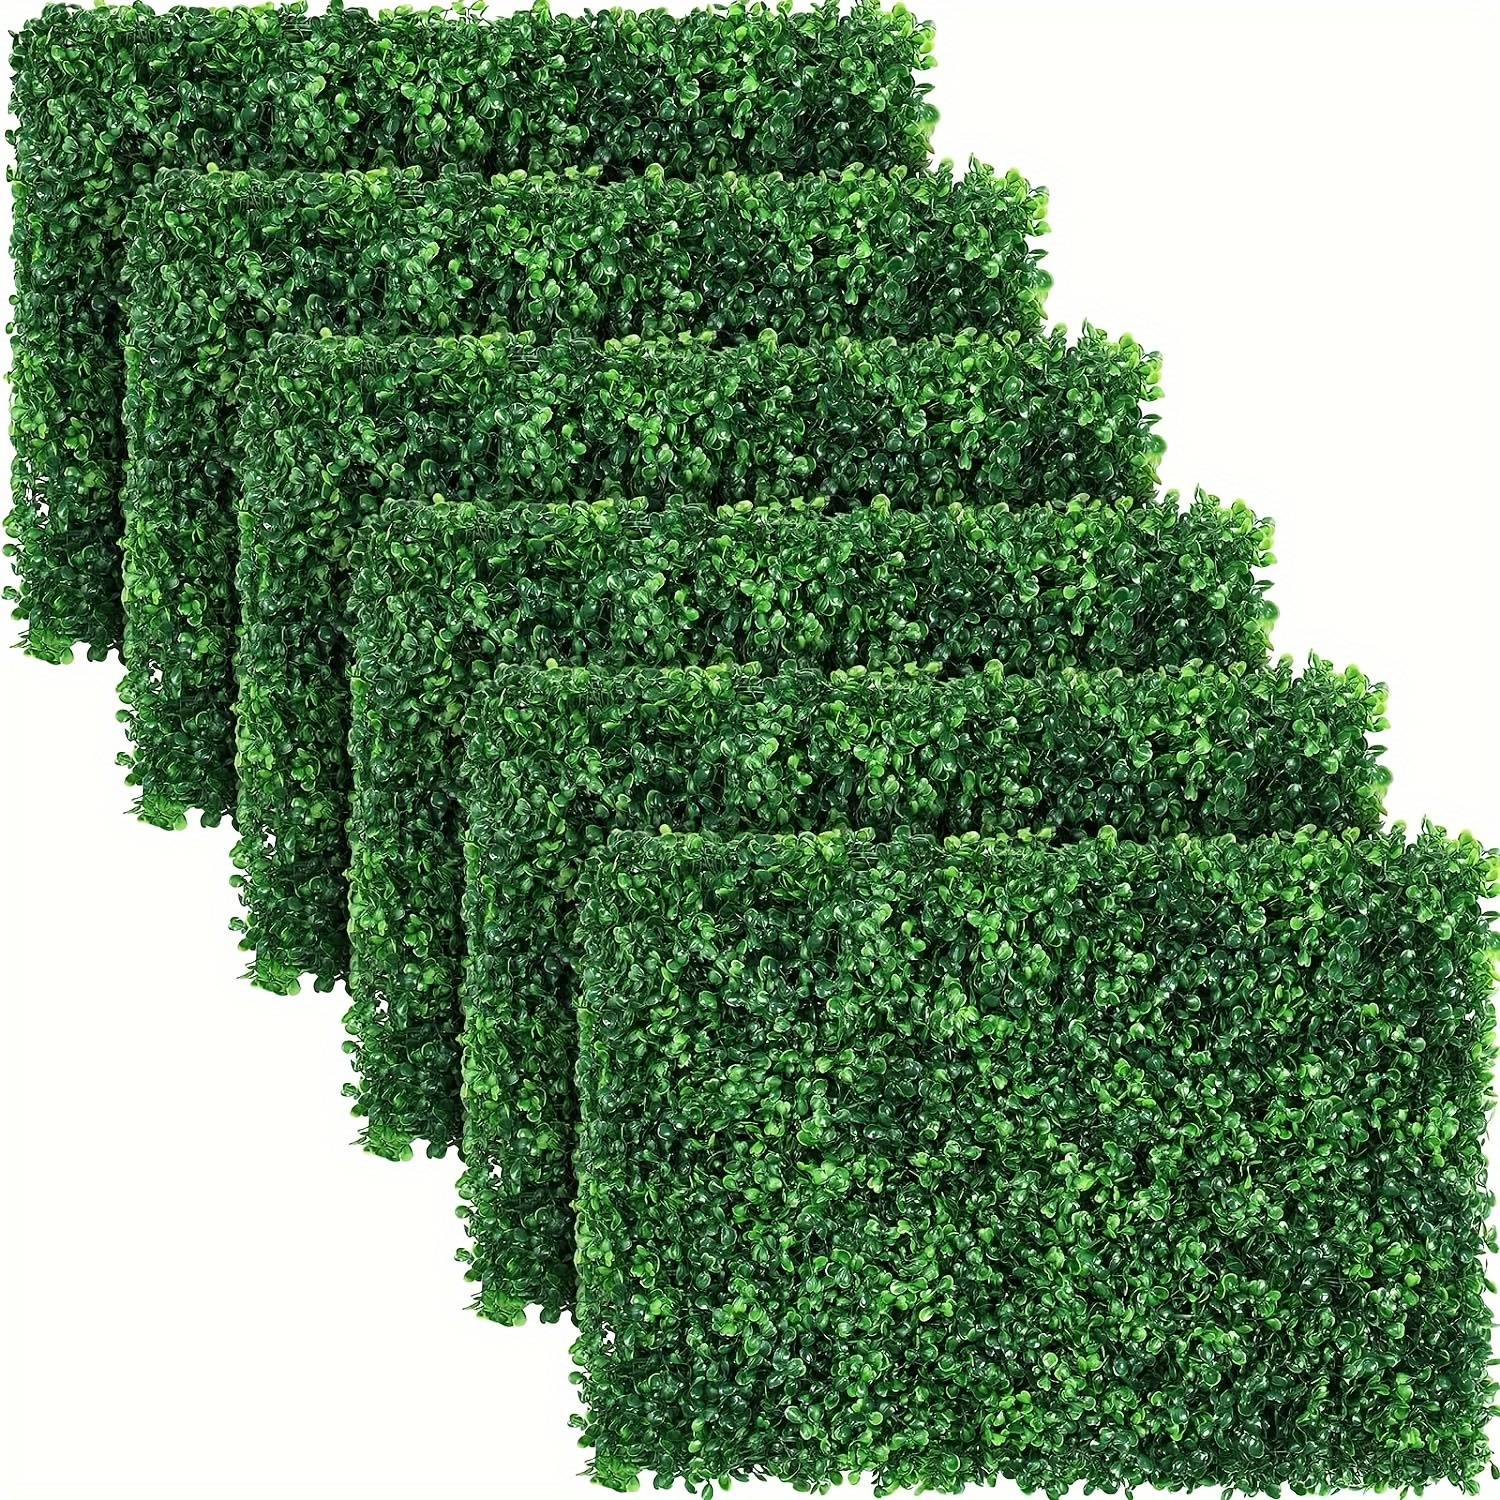 

6 Pcs Artificial Boxwood Hedge Panels, Greenery Grass Wall Decor For Privacy Fence, Indoor Outdoor Garden Decoration, Plastic Wall Mount, No Electricity Or Feathers Required (40 X 60cm)